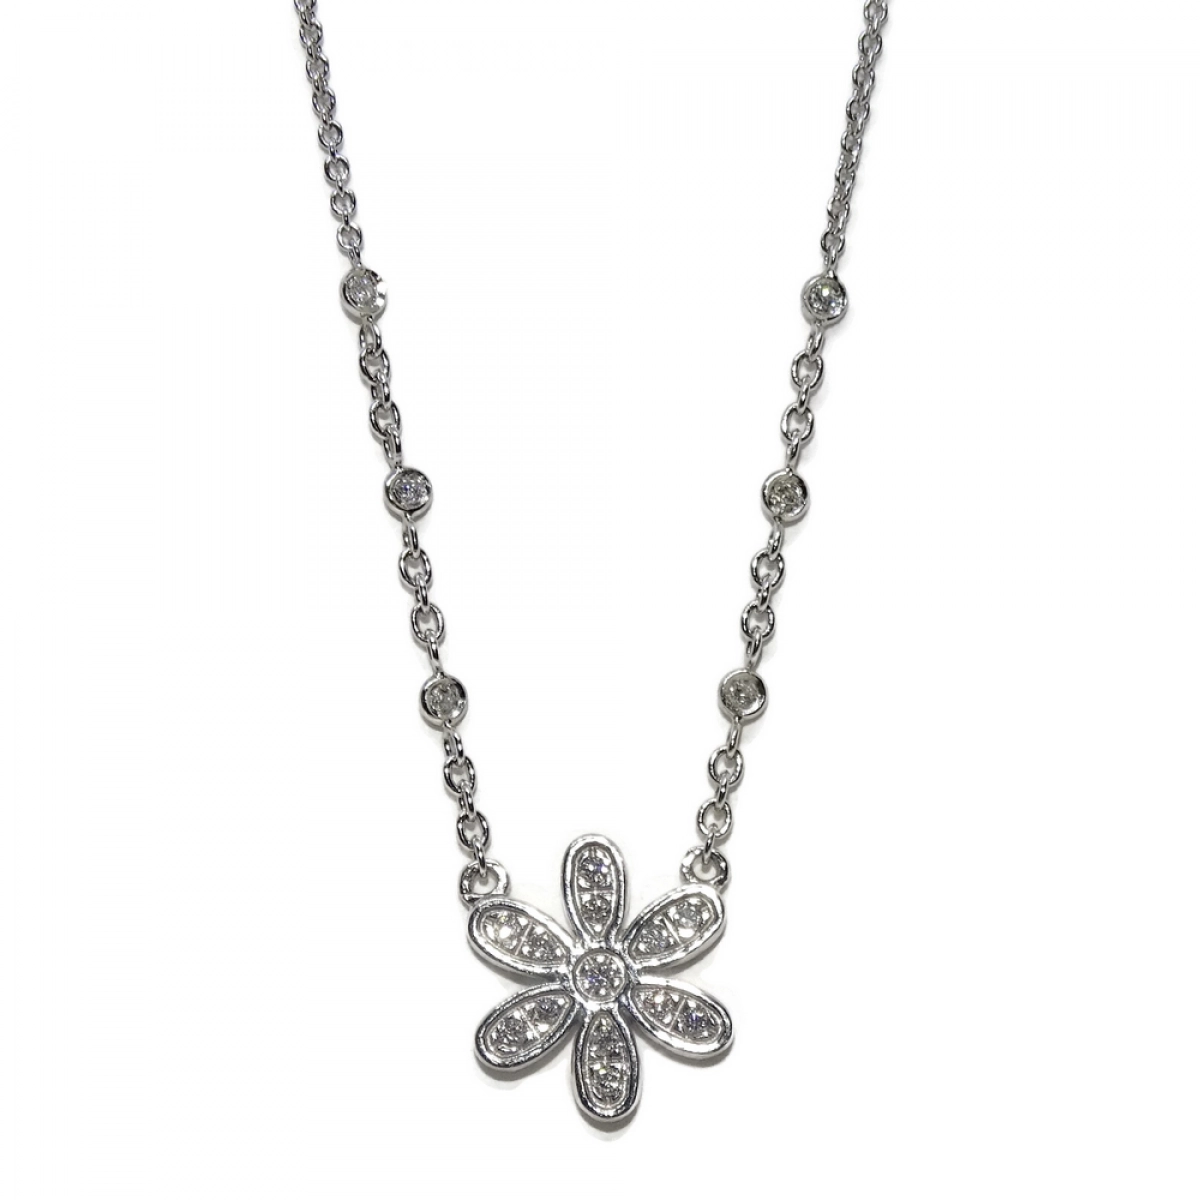 NECKLACE WITH 0.28 CTS OF DIAMONDS SET INTO A FLOWER, AND NEVER SAY NEVER